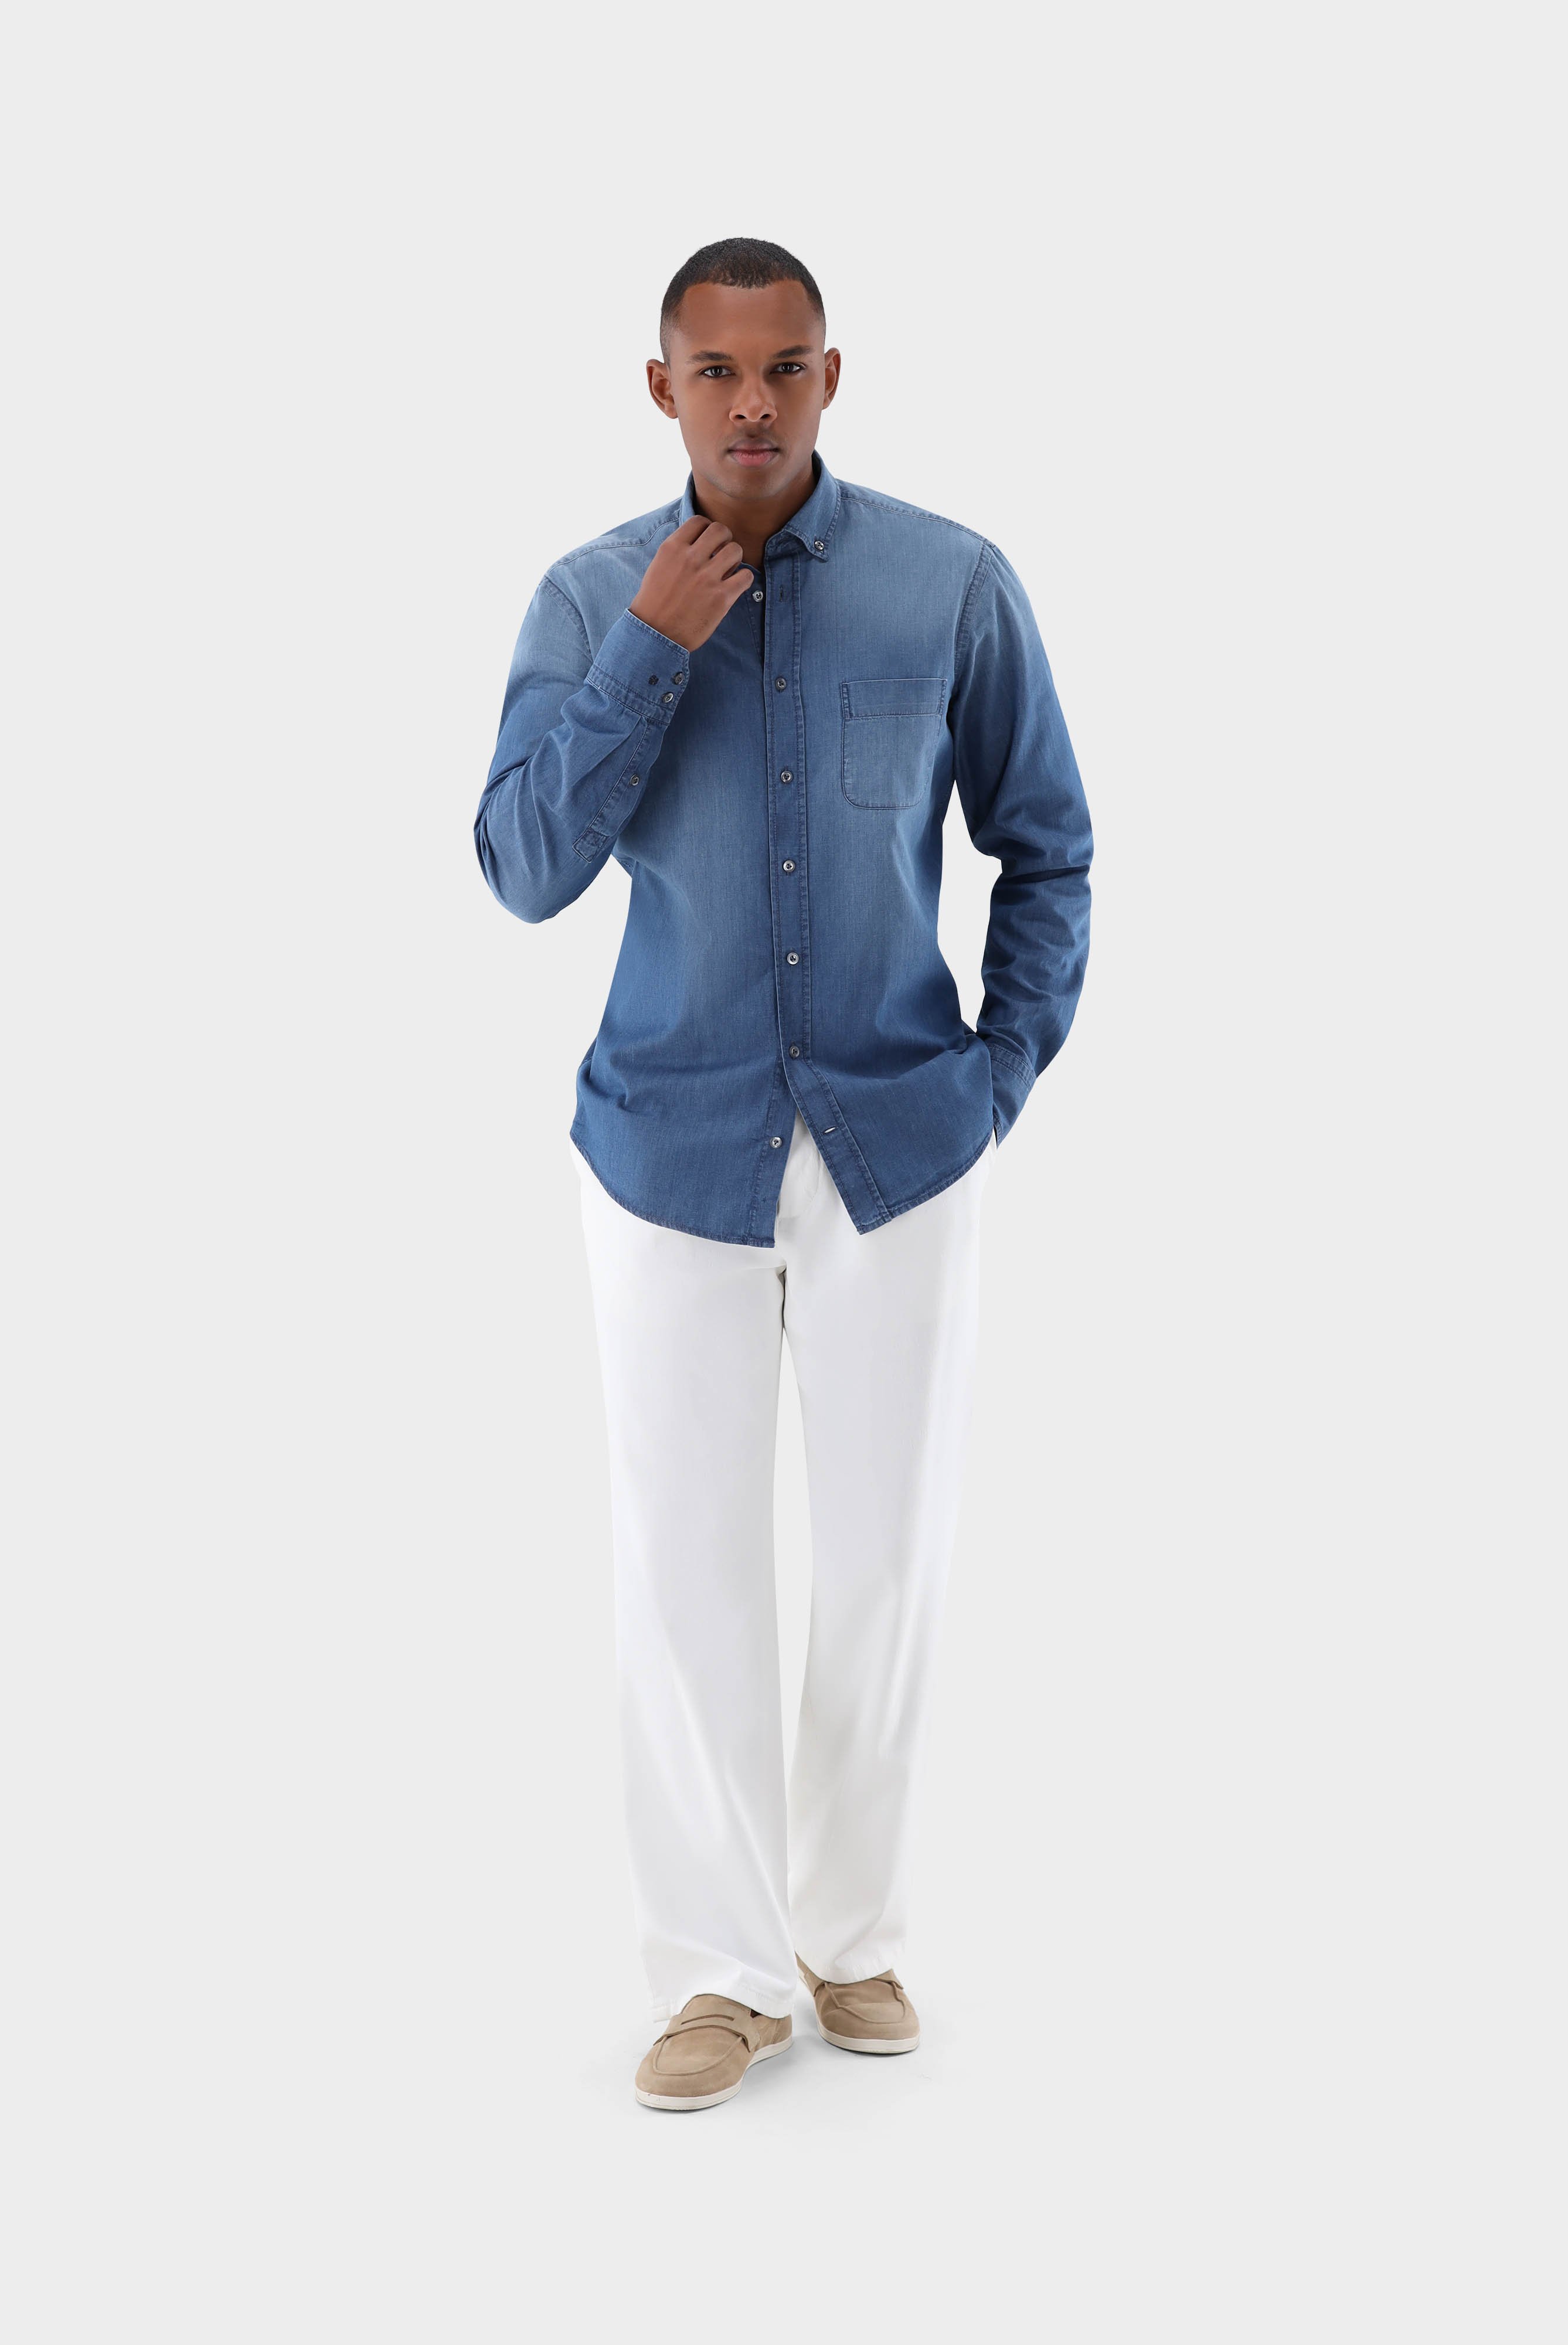 Casual Shirts+Jeans Hemd Tailor Fit+20.2013.ET.155330.740.37